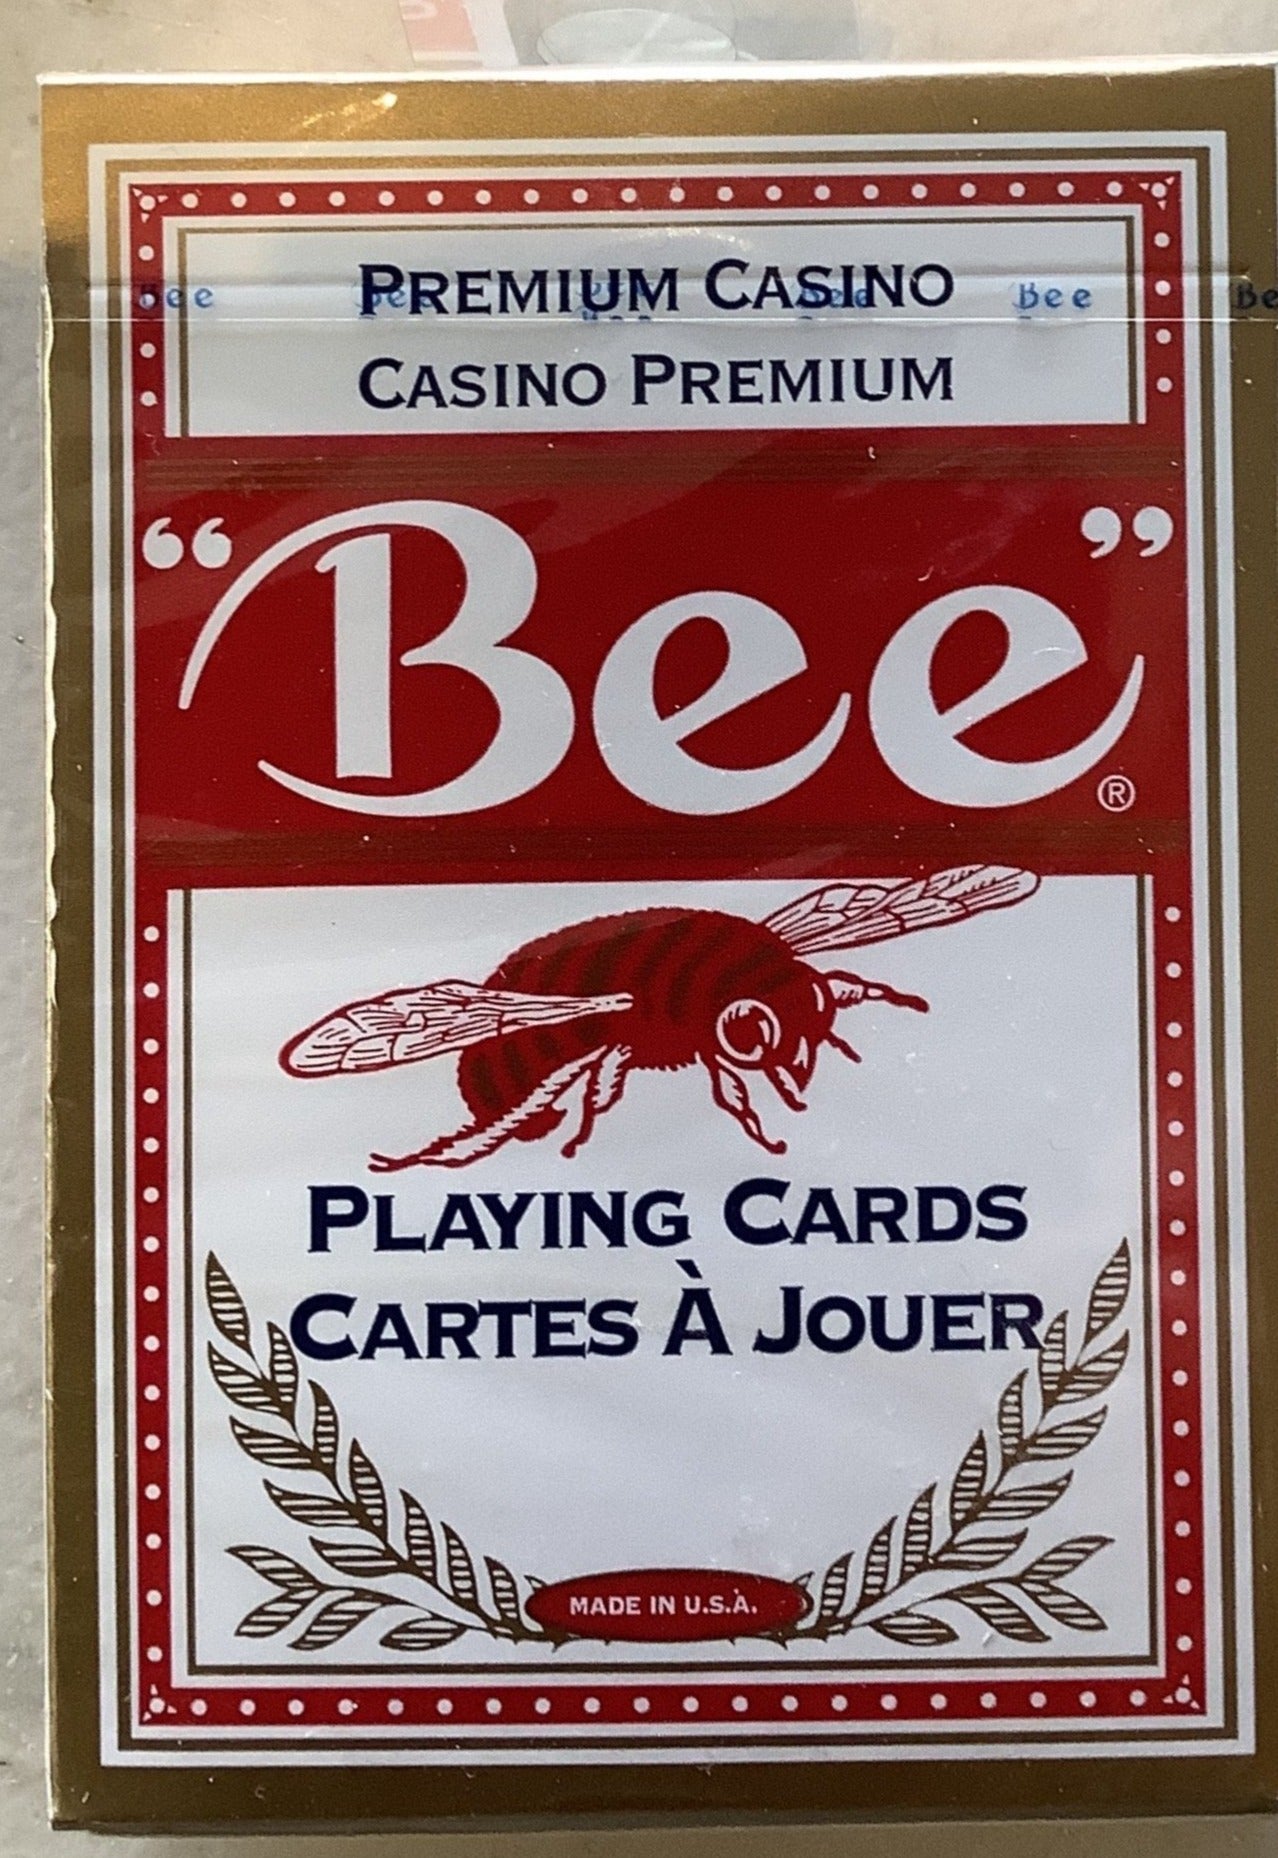 BEE Brand "Official Casino" Playing Cards